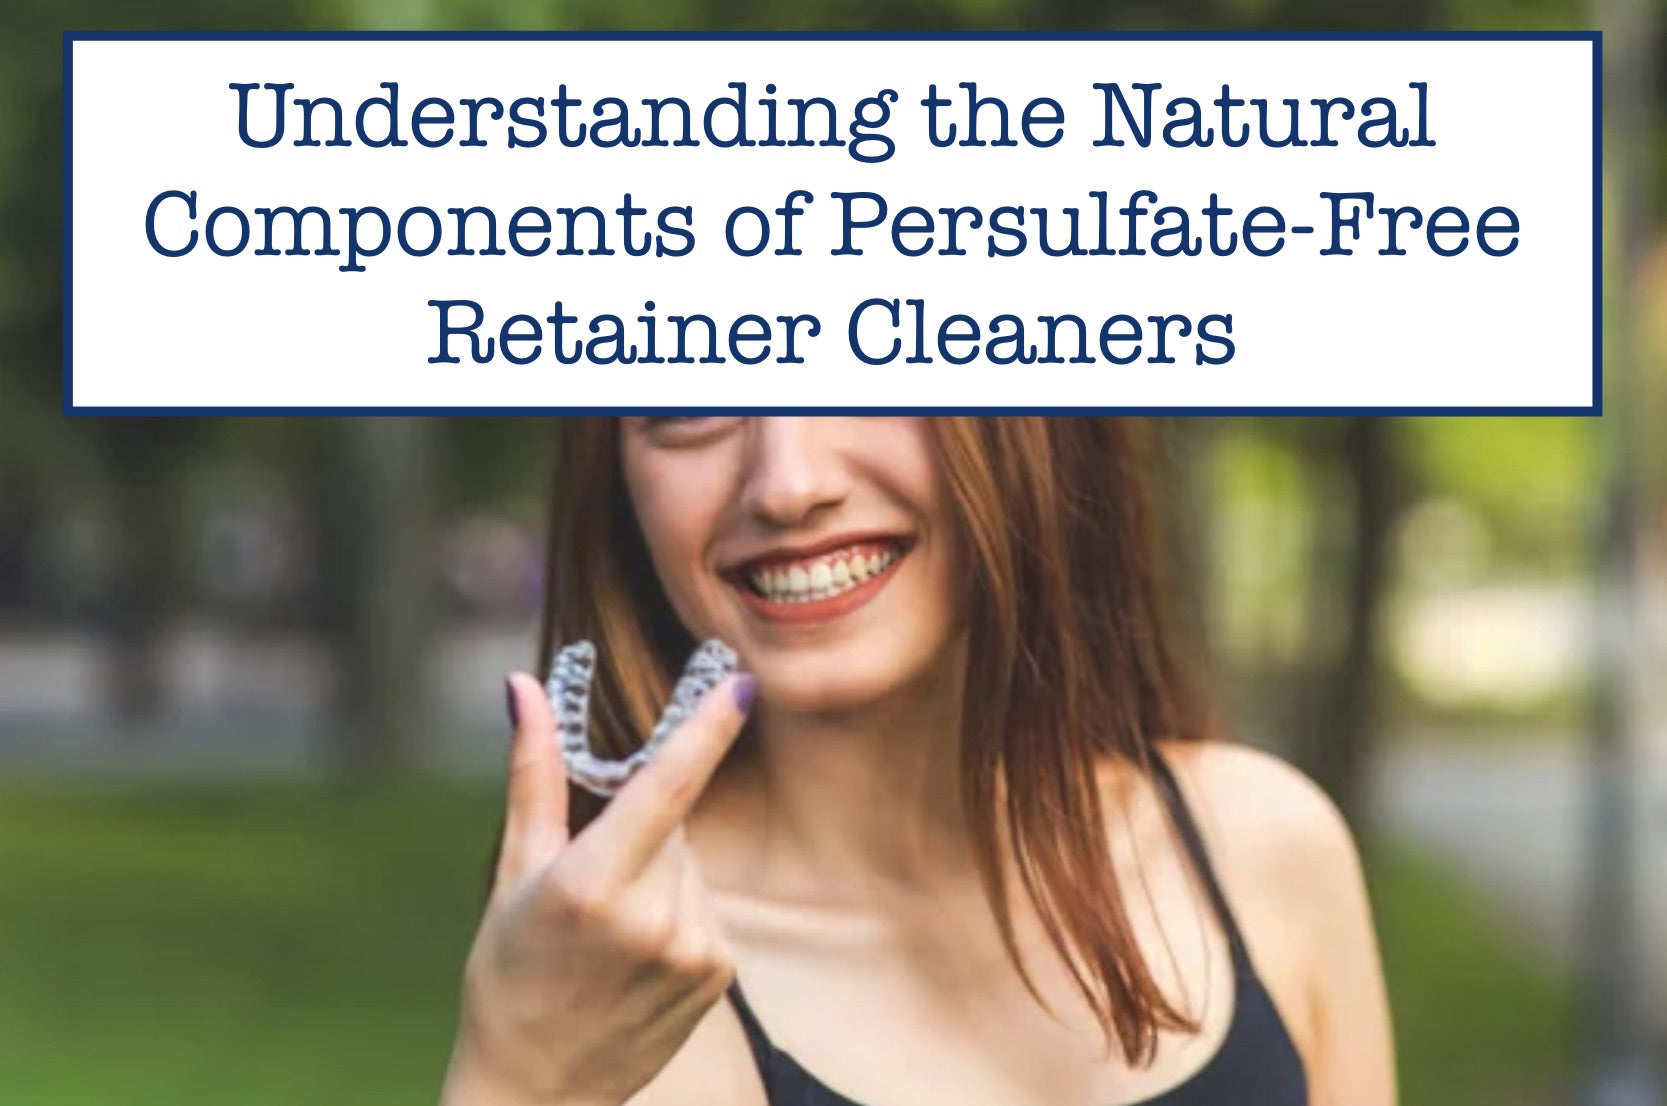 Understanding the Natural Components of Persulfate-Free Retainer Cleaners